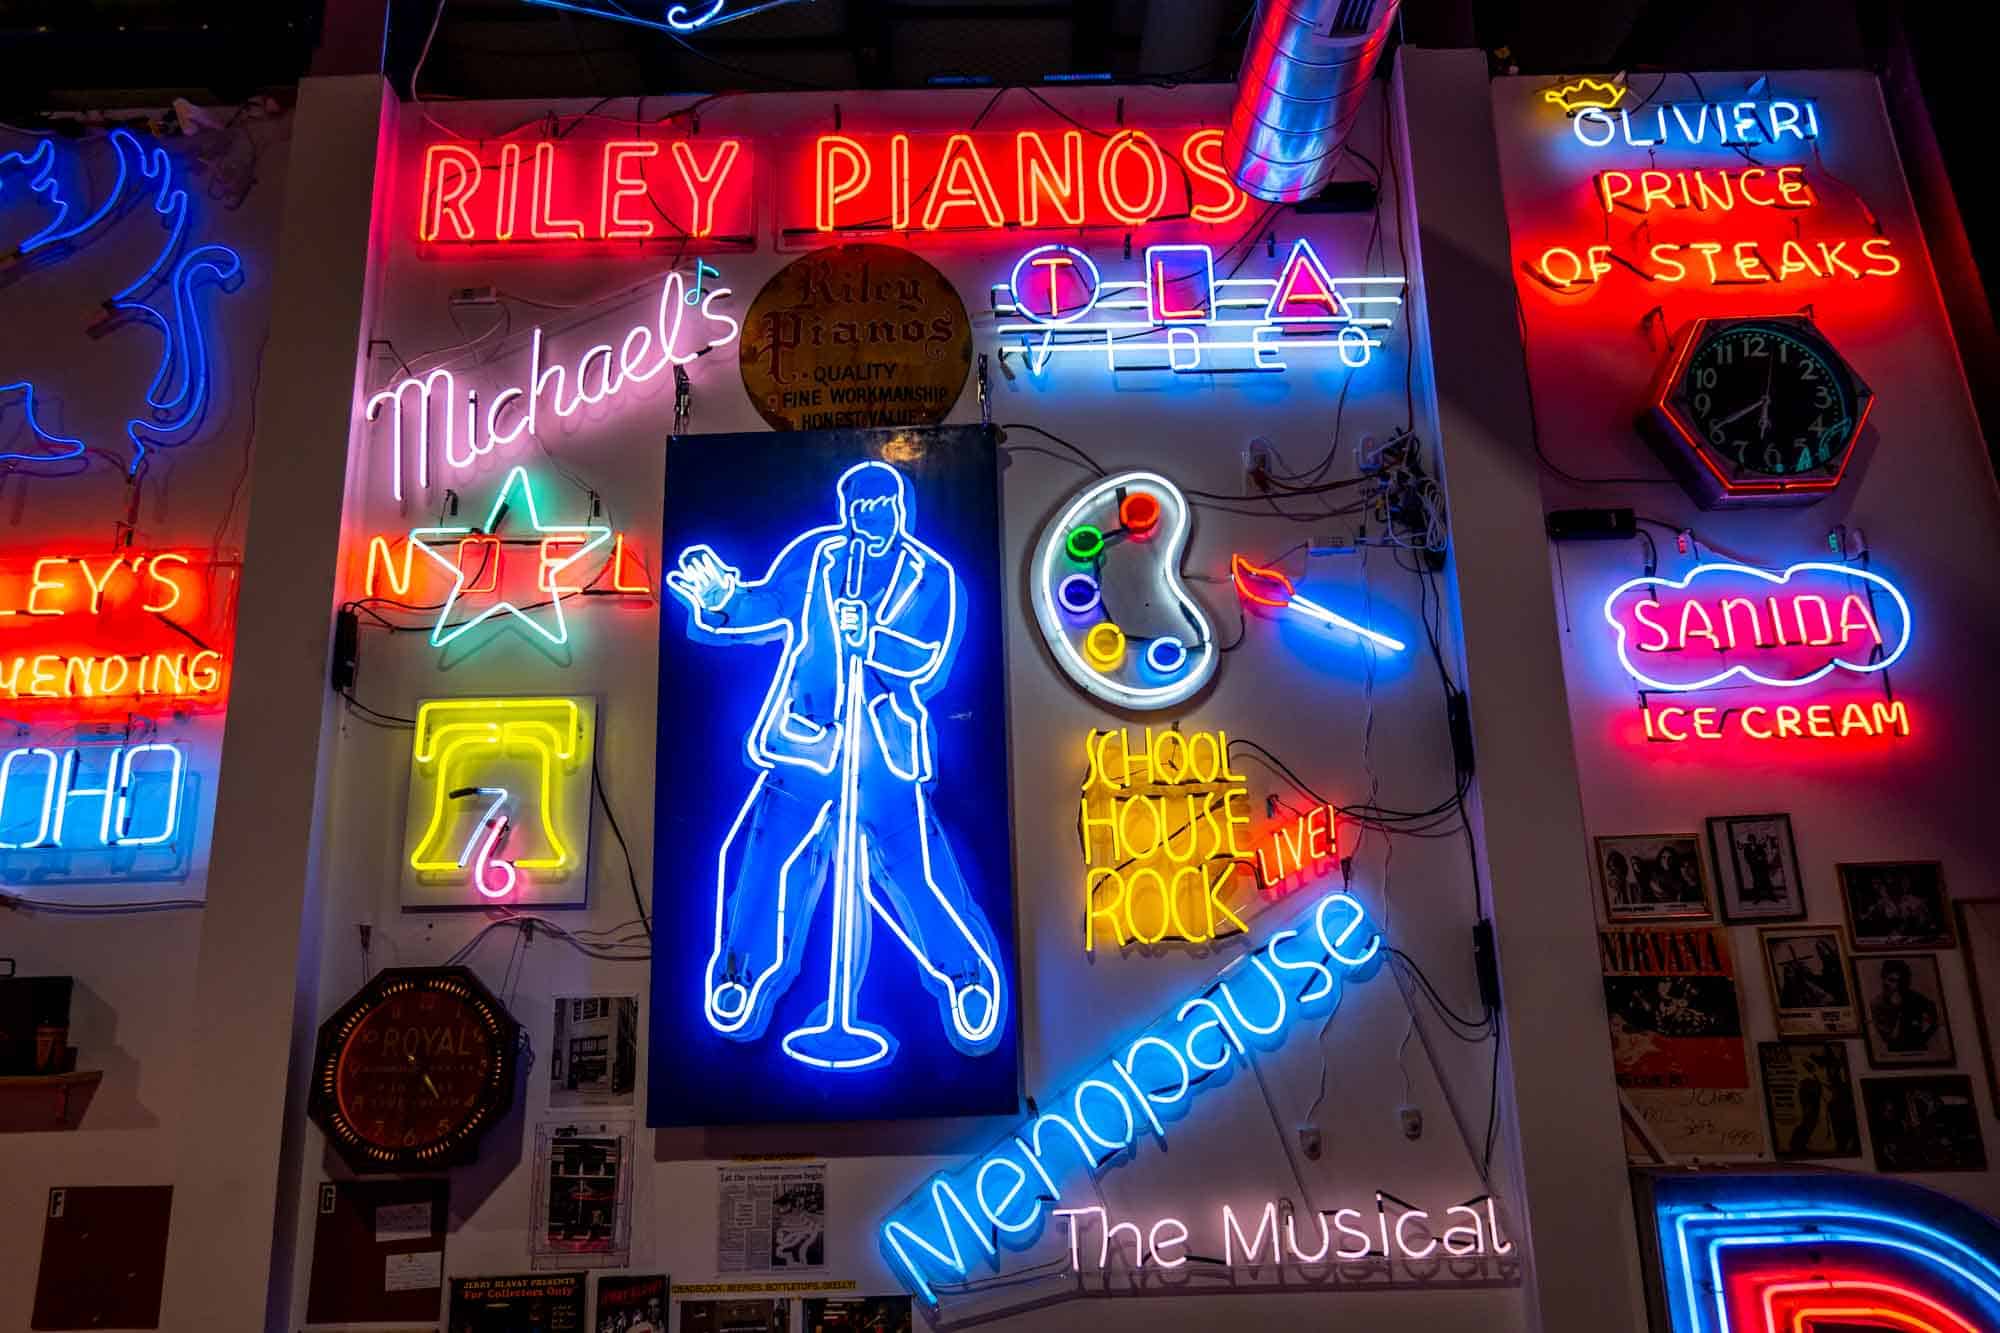 Colorful neon signs on a wall, including an image of Elvis, a painters' palette, and "School House Rock Live!"